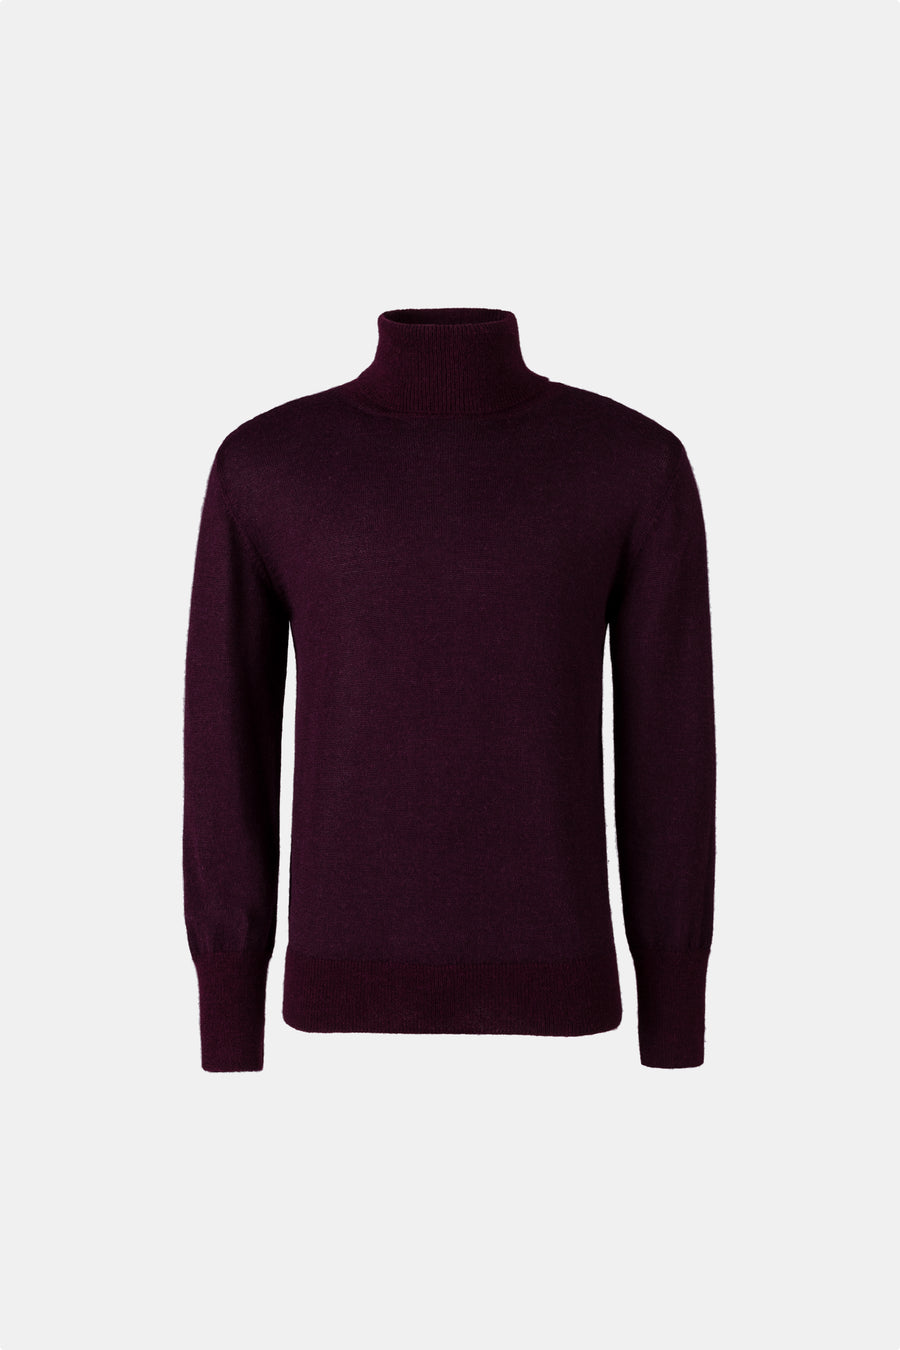 AQVAROSSA Juliaca wide knitted turtleneck in colour bordeaux extra fine alpaca front view